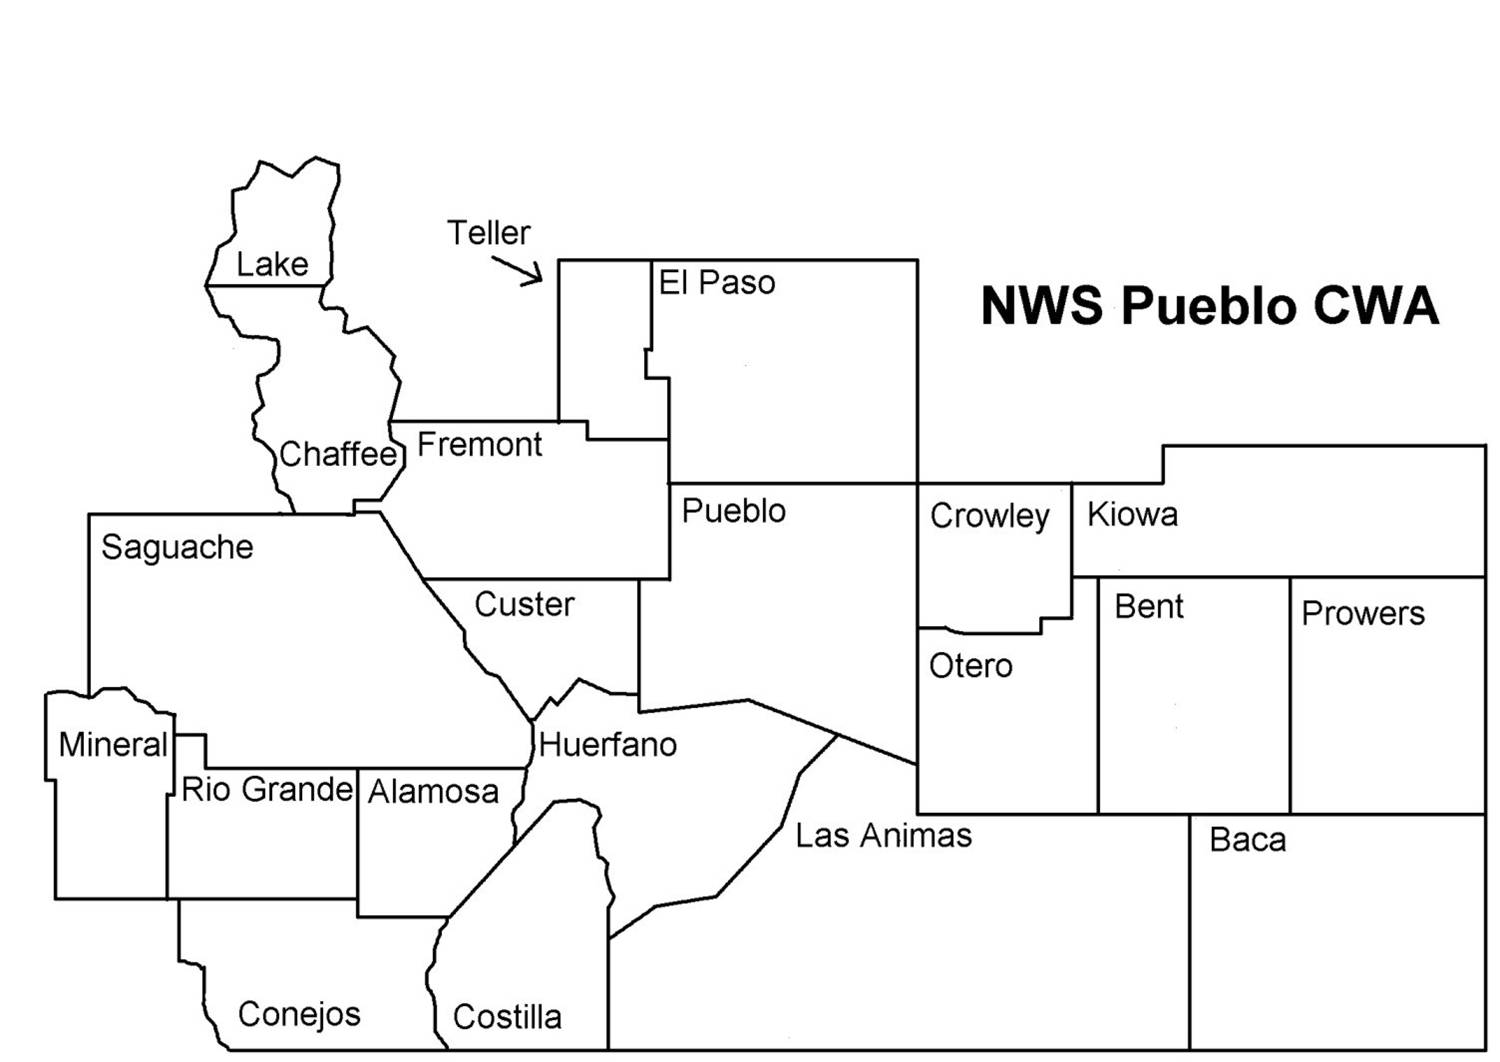 Map showing counties within the NWS Pueblo county warning area.